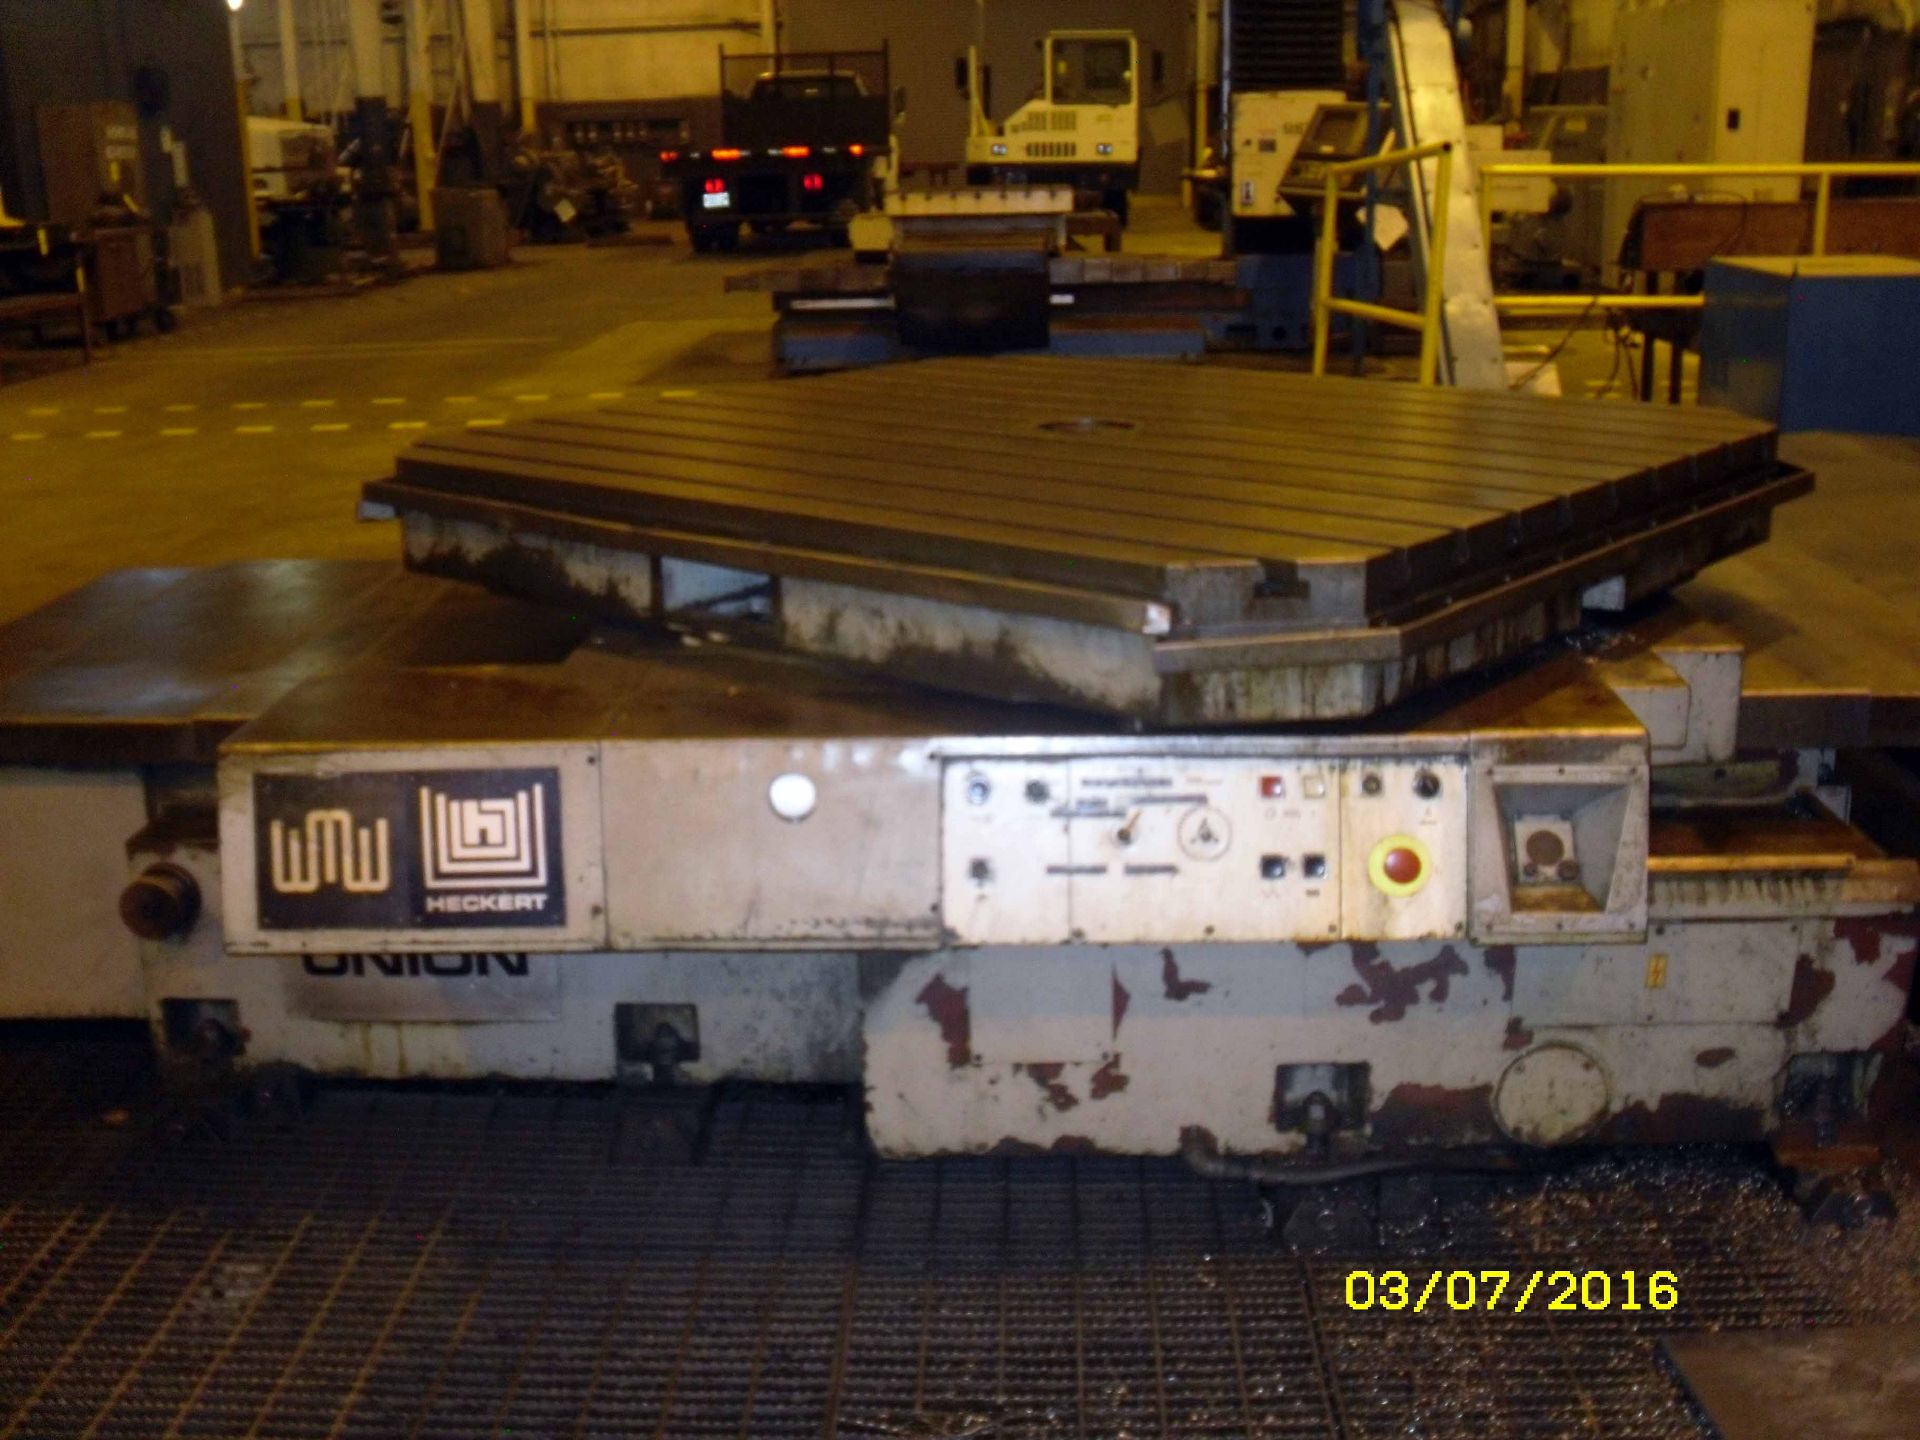 CROSSLIDING POWER ROTARY TABLE, WMW UNION, 78.8" x 70.8" table, approx. 60" table cross travel, 6 kW - Image 2 of 2